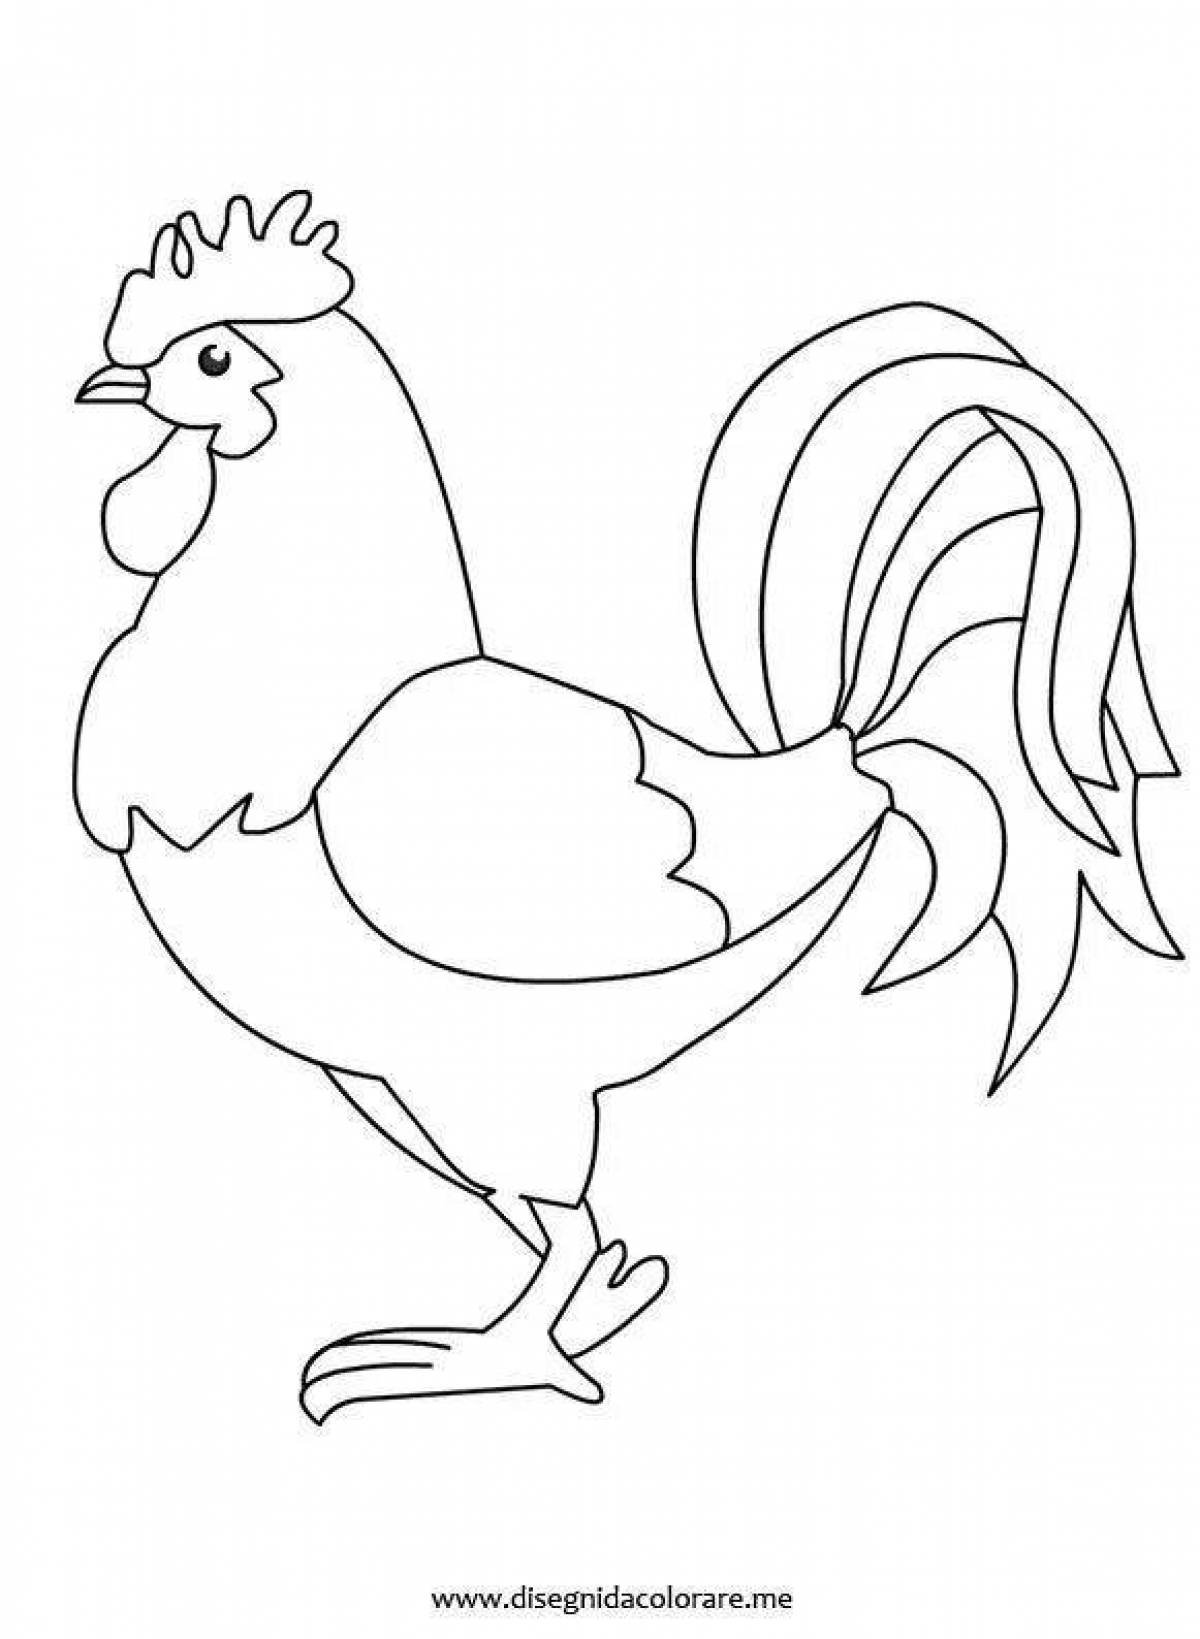 Adorable rooster coloring page for kids